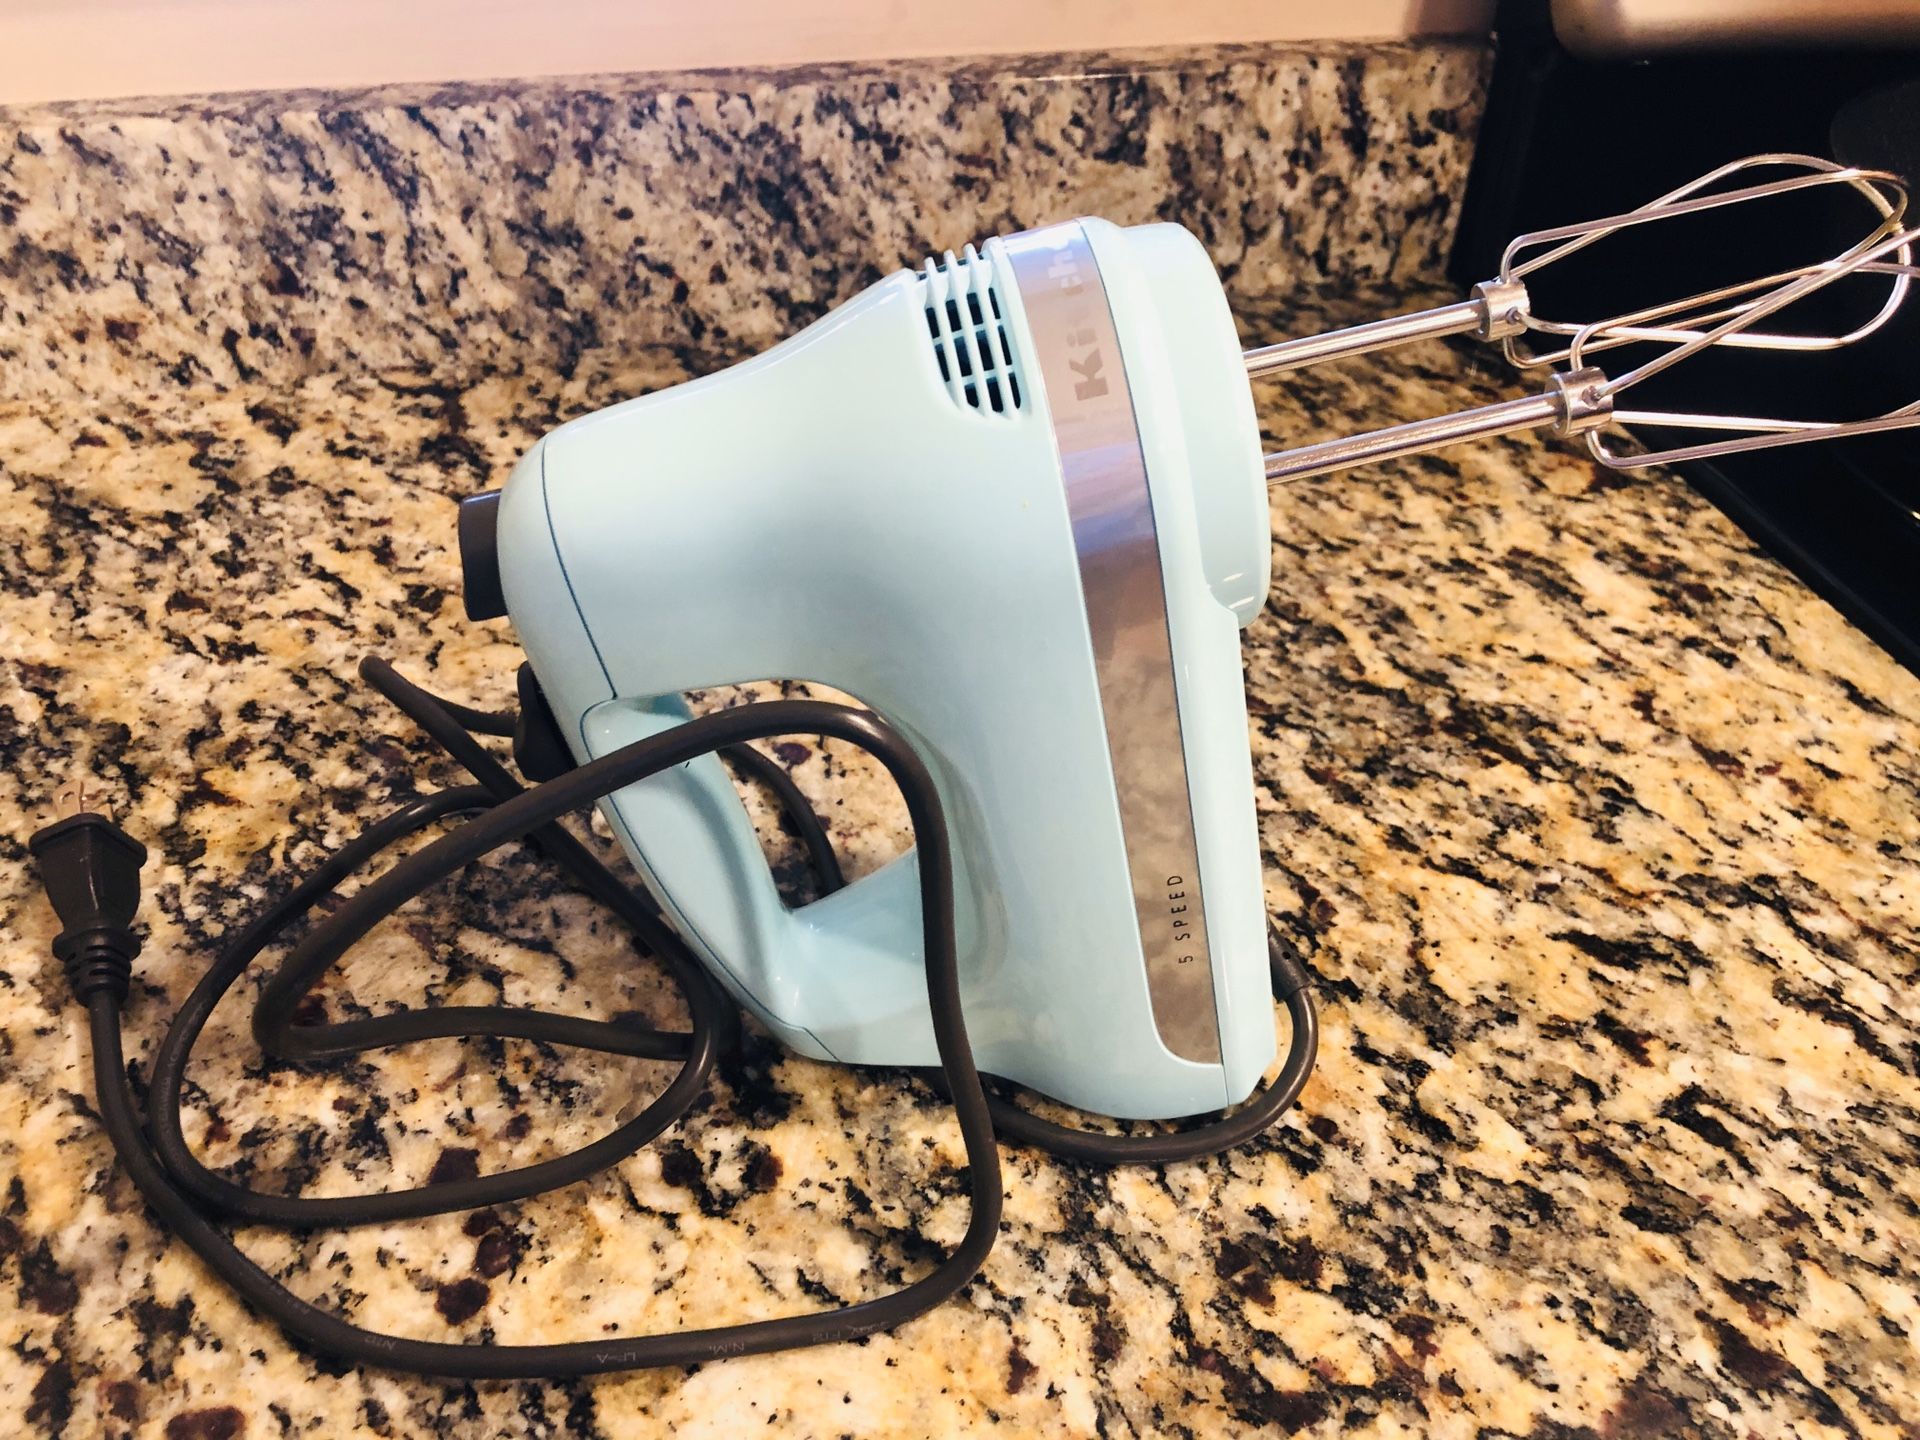 KitchenAid Electric Mixer almost brand new on Sale